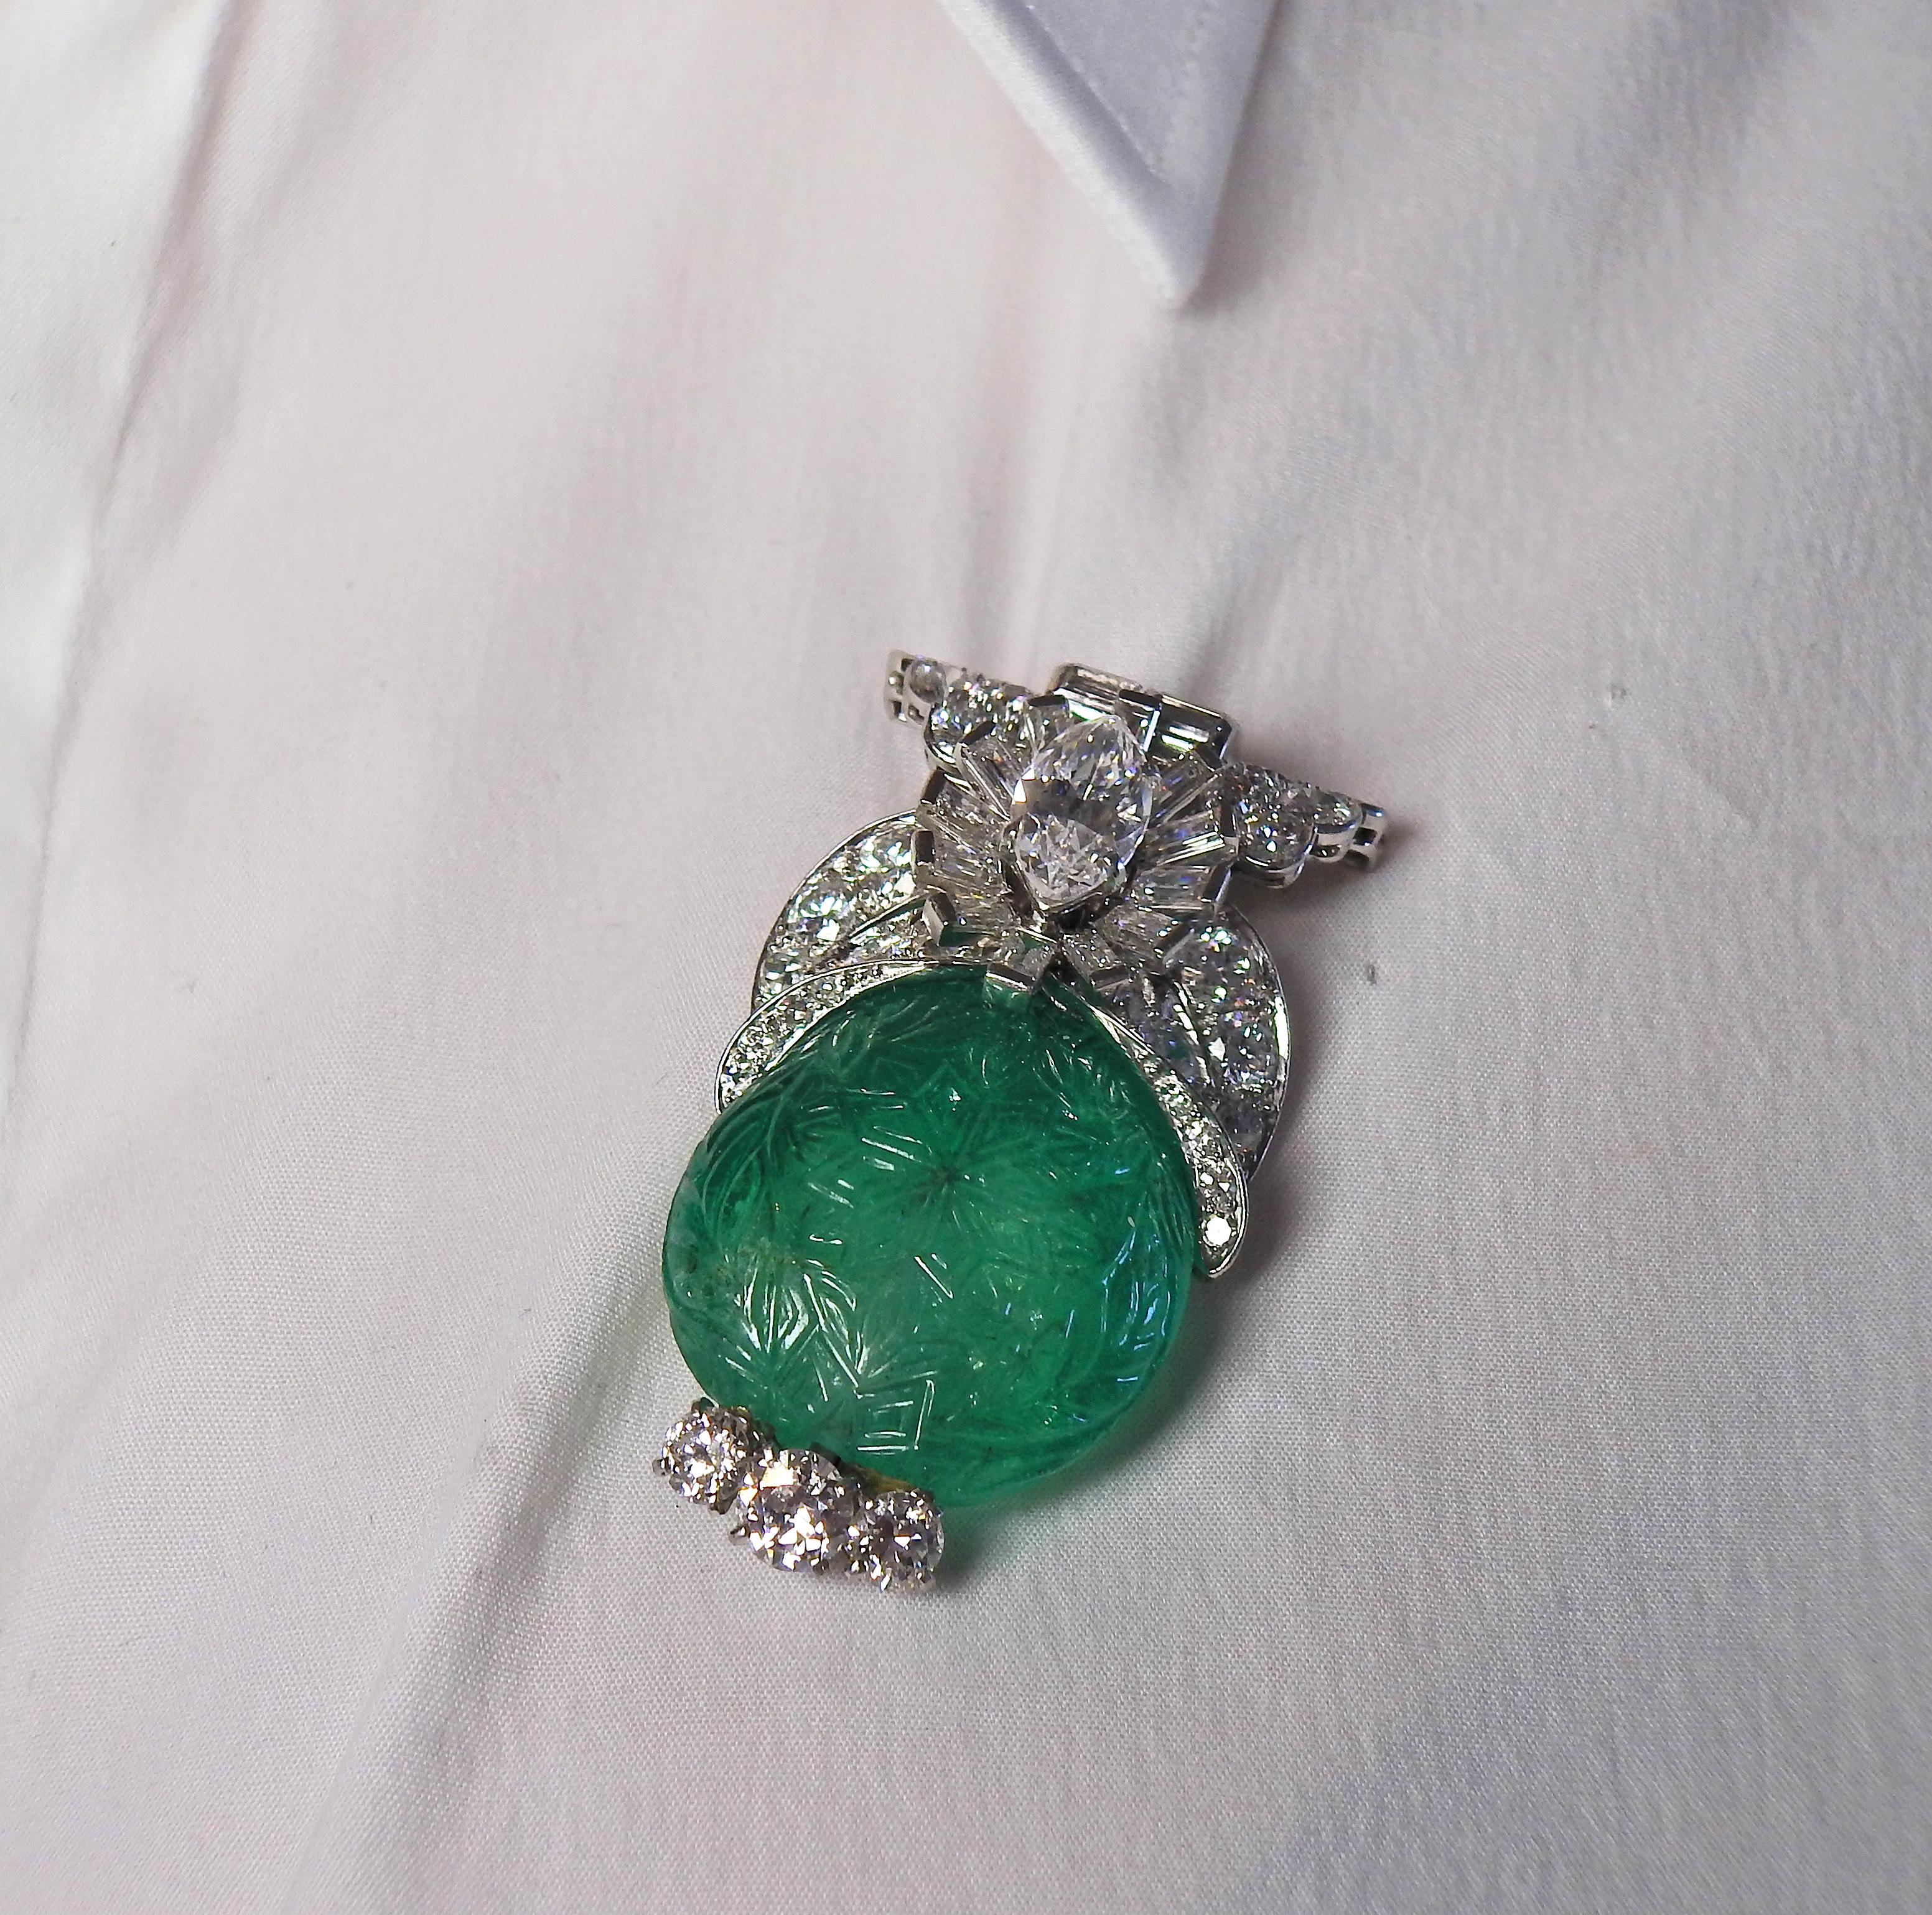 Marquise Cut Cartier approximately 65 Carat Carved Colombian Emerald Diamond Platinum Brooch